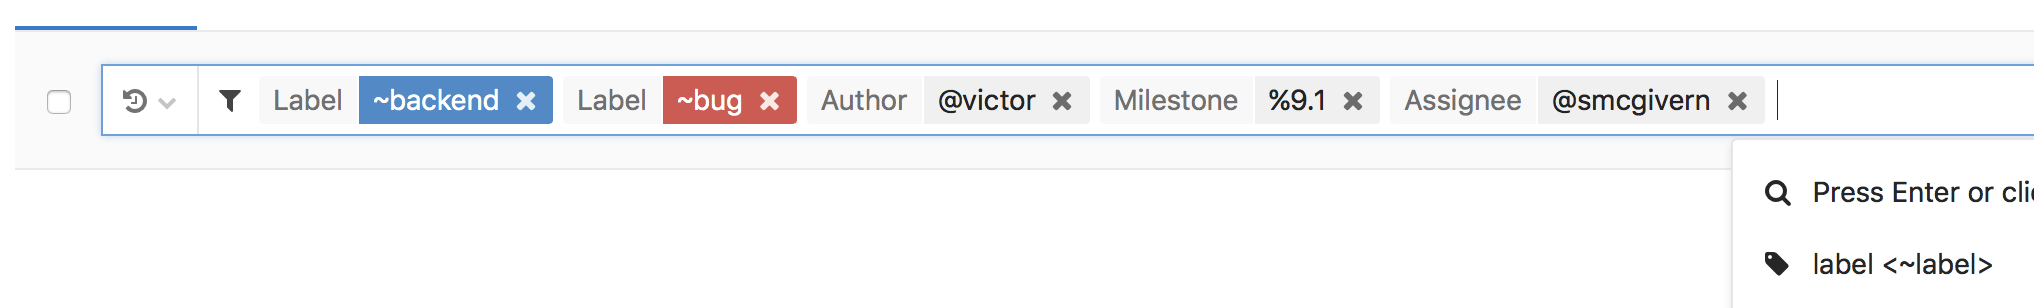 Remove Filter in Search Bar